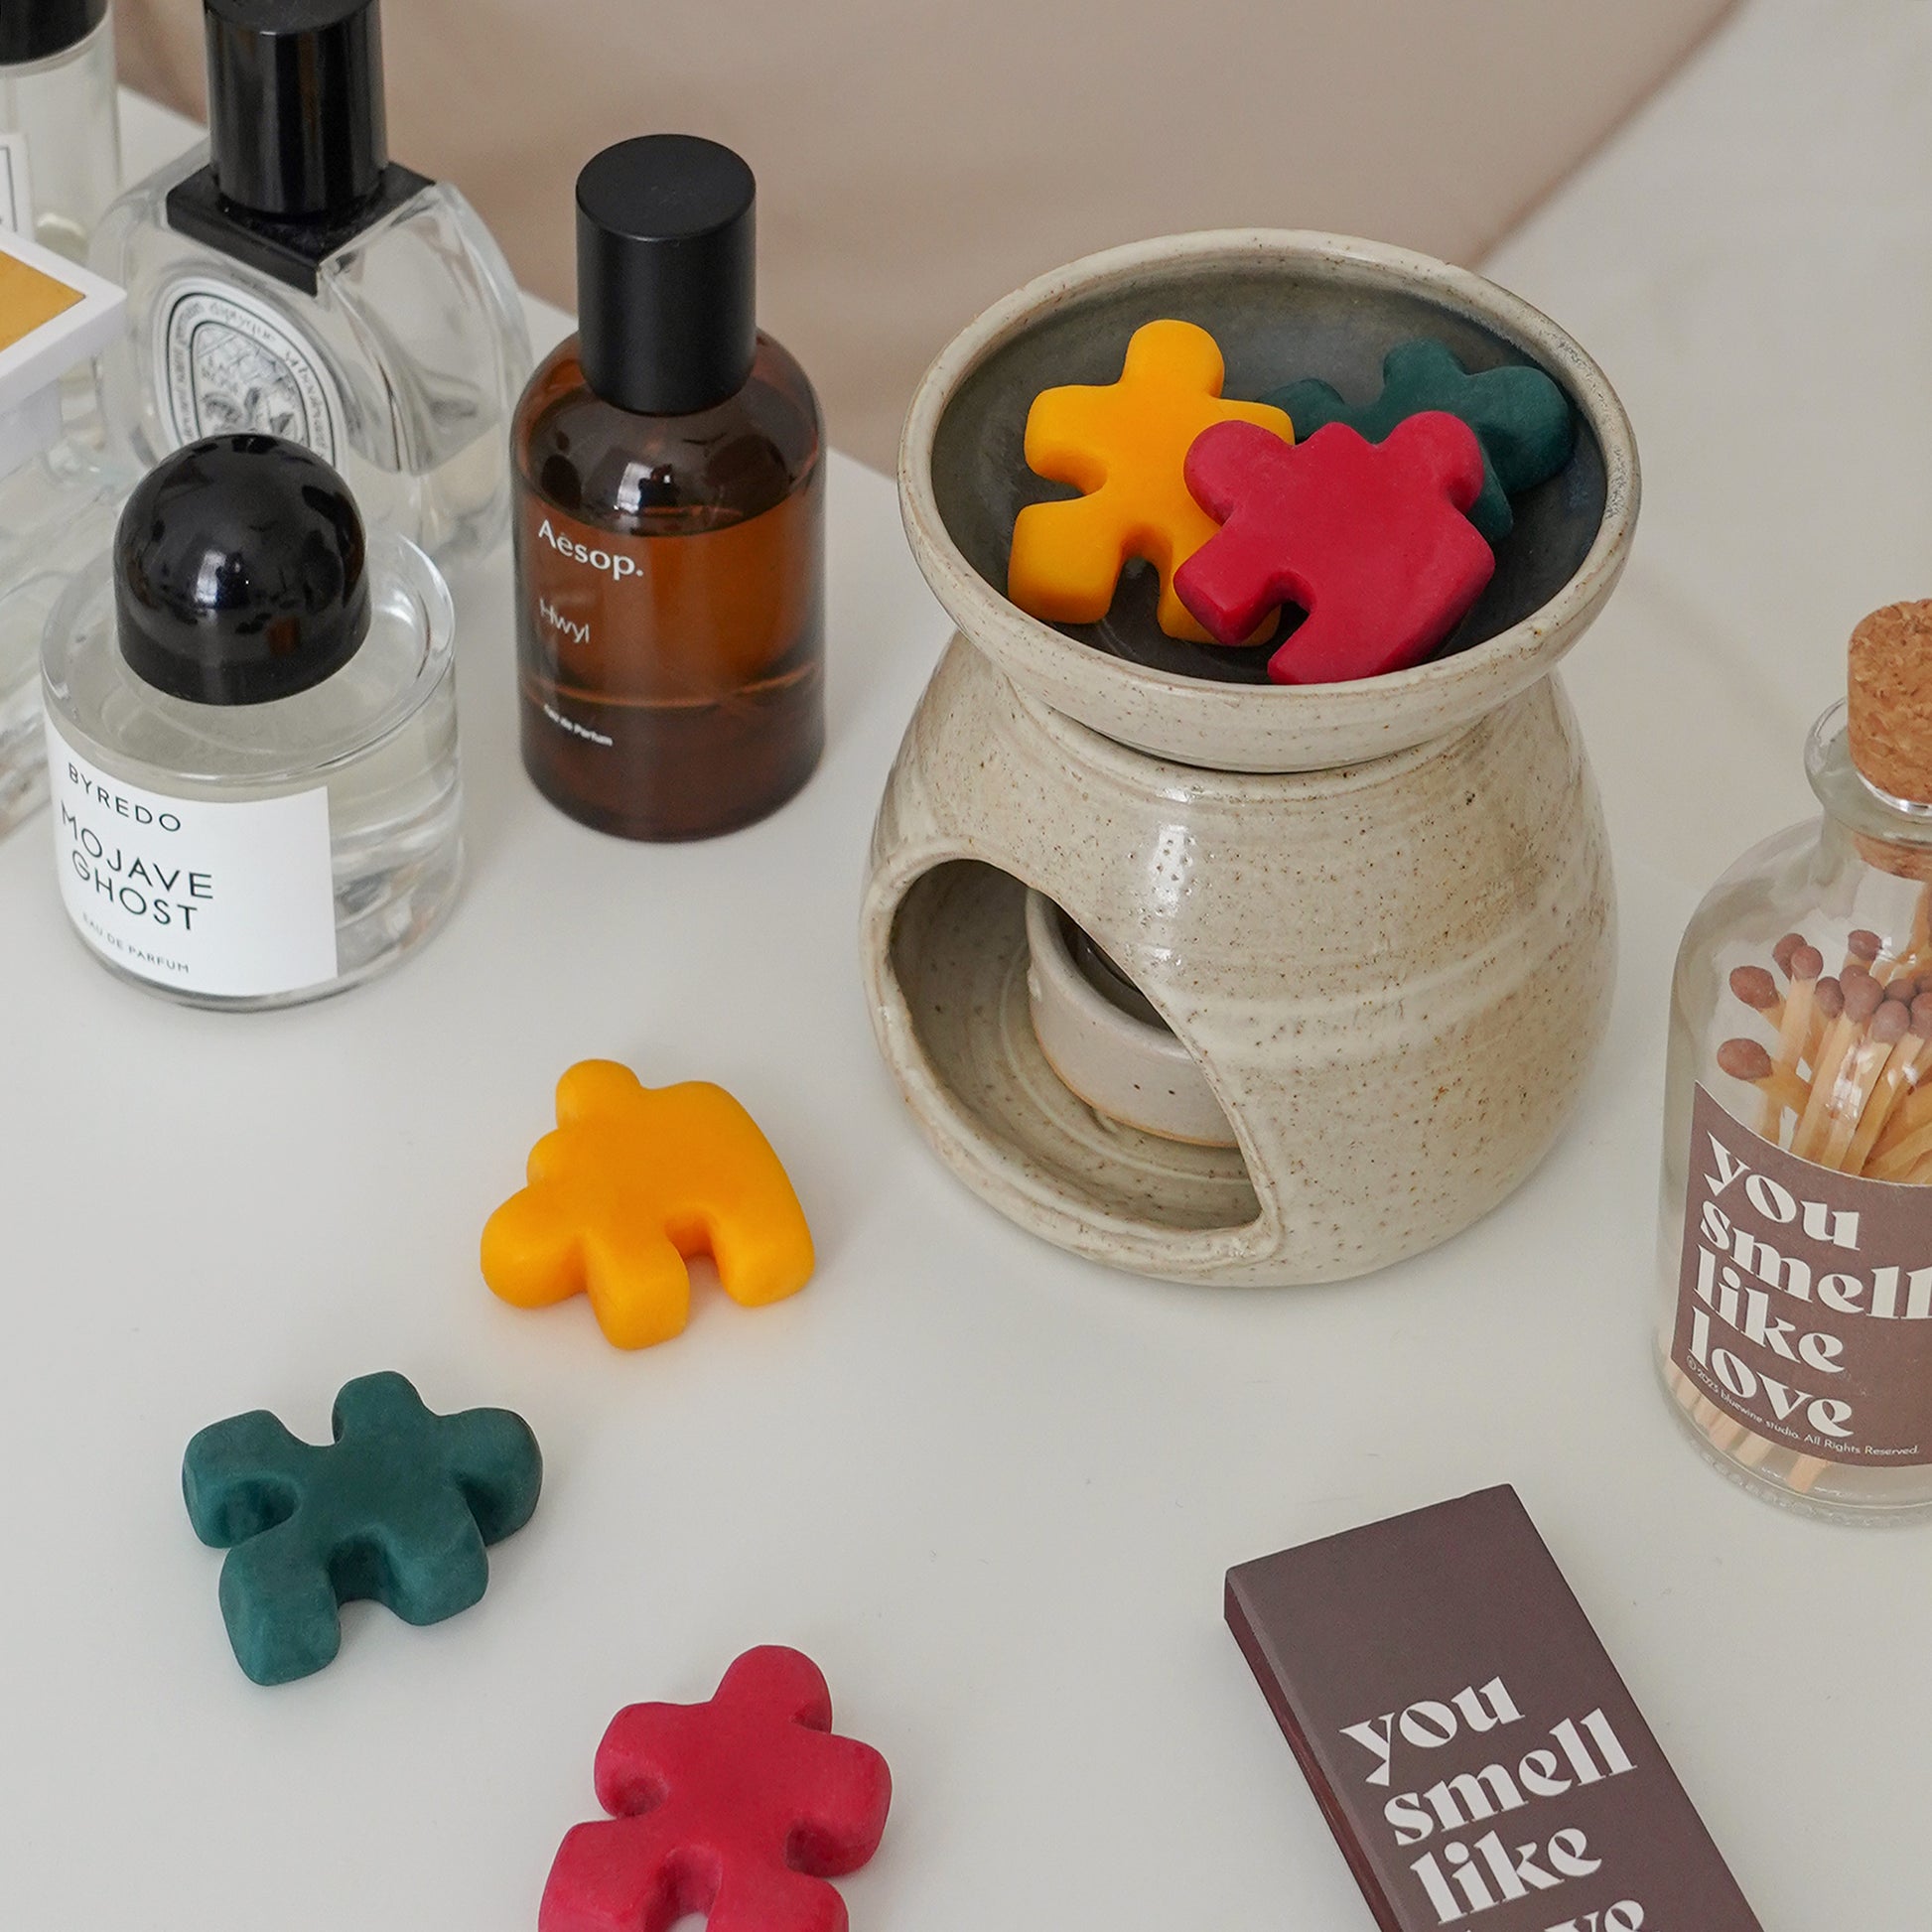 red, yellow, and green puzzle shape wax melts in a wax warmer, fragrances, a match bottle and a matchbox inscribed with "you smell like love"